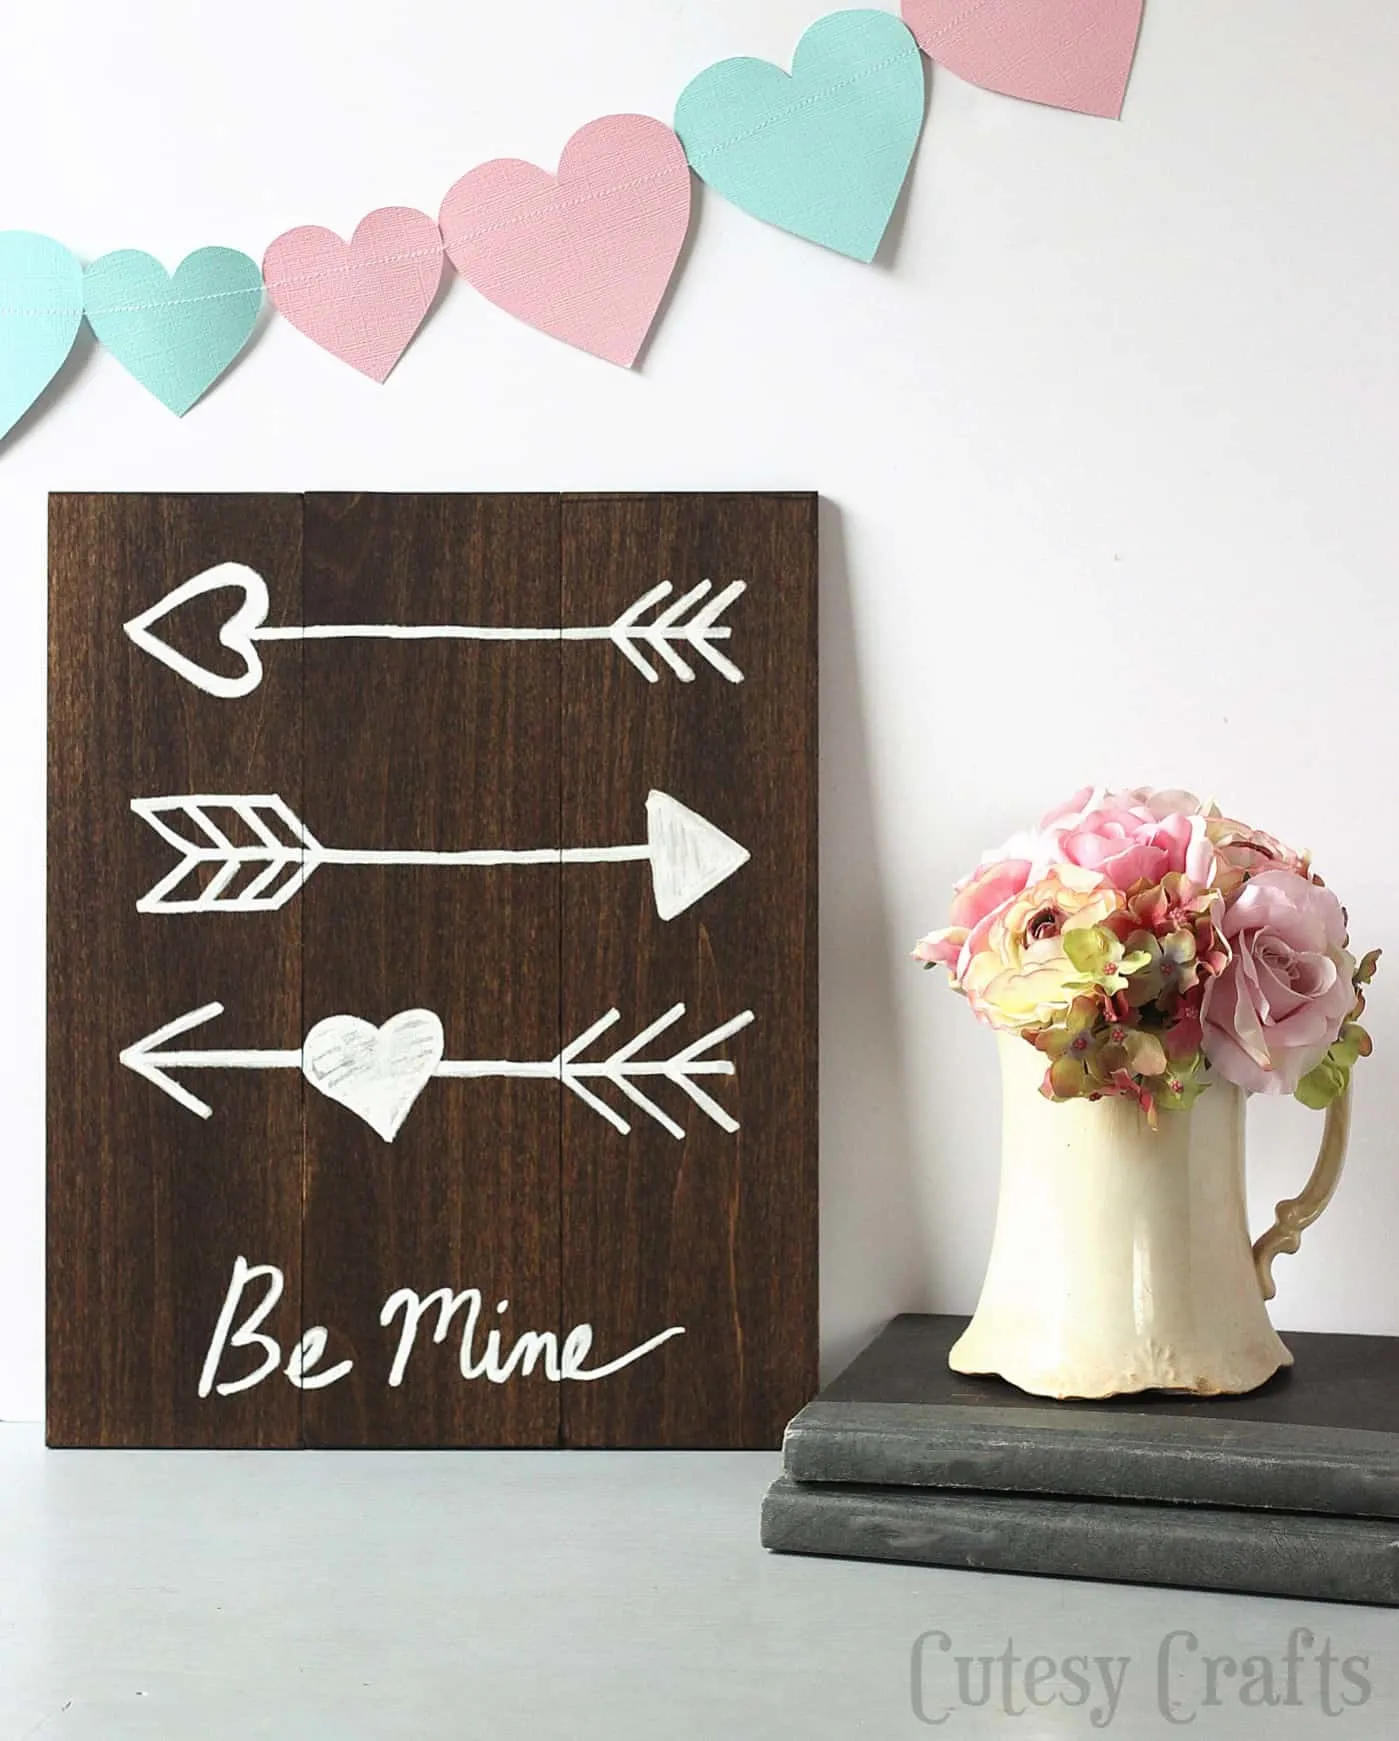 This DIY Valentine's Day arrow art is easy for anyone to make - no nails required, and you can grab a free printable to help you. So cute!